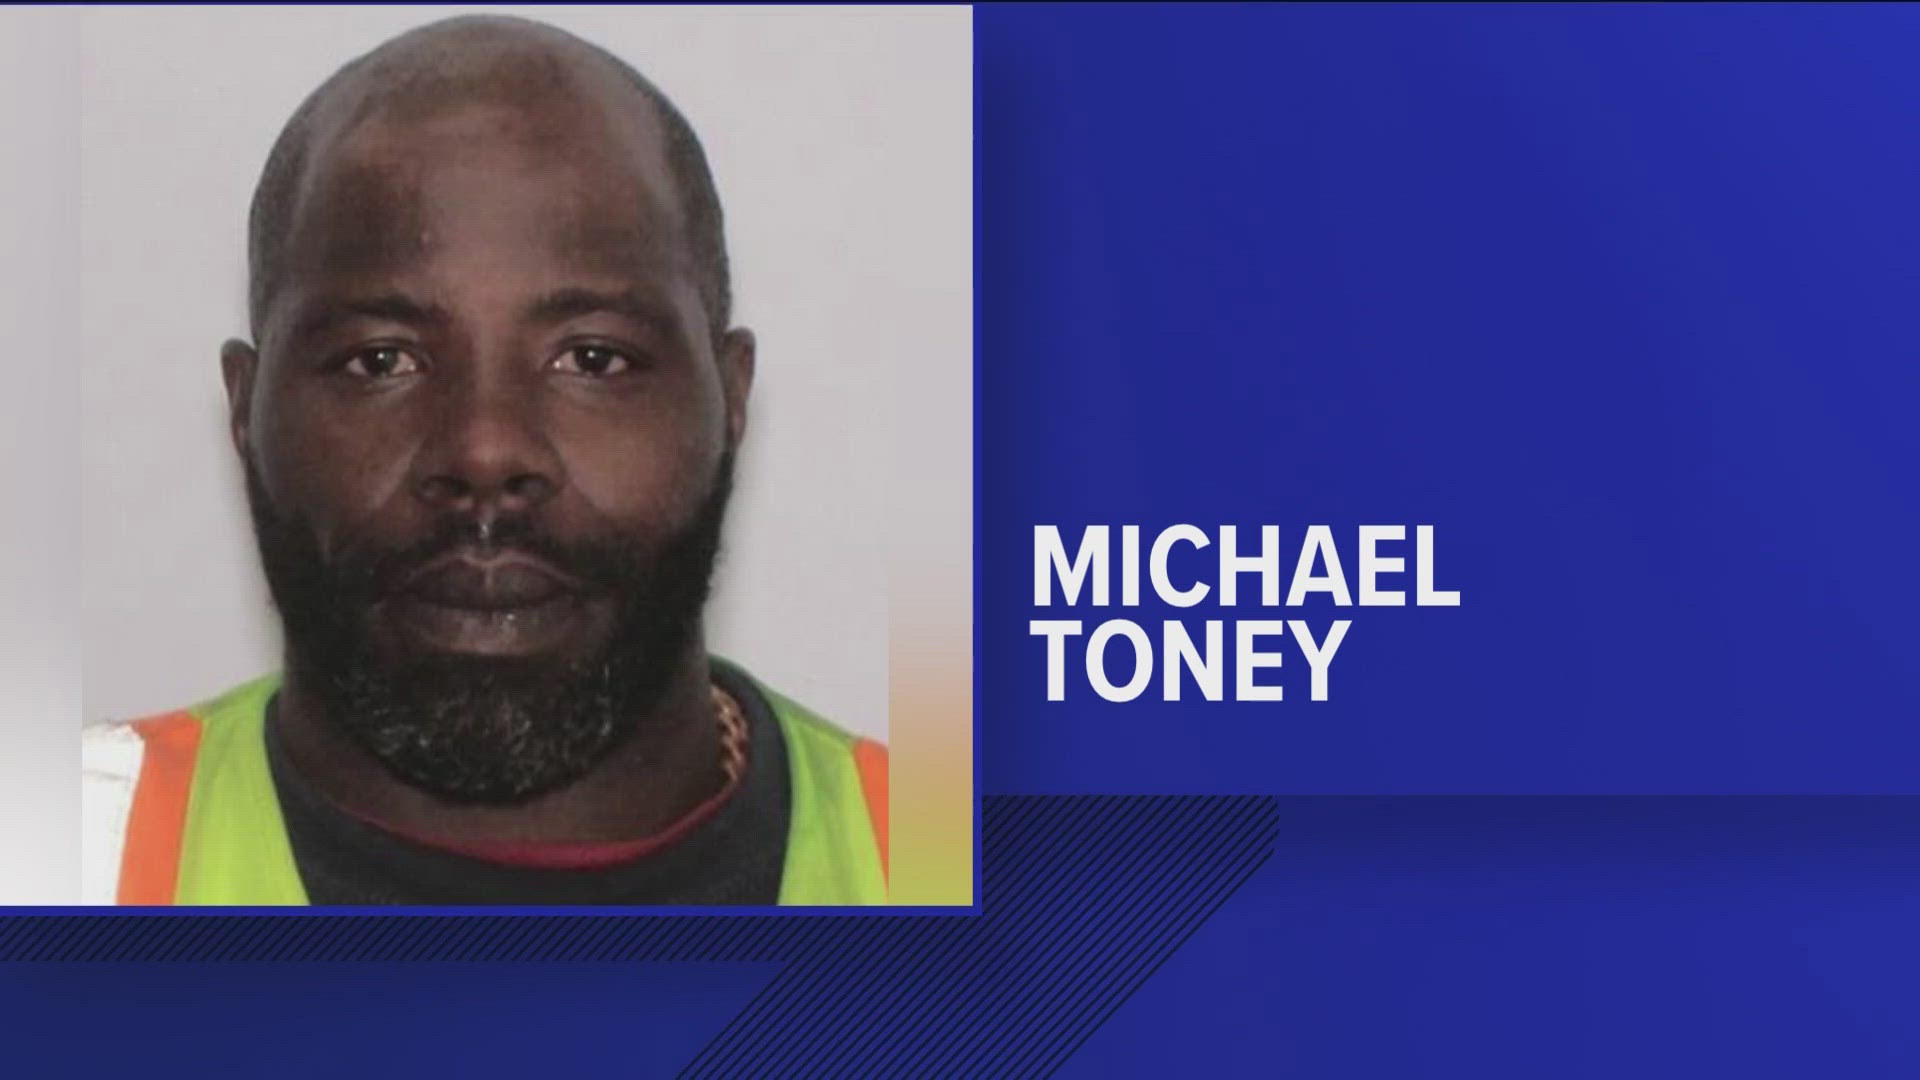 Michael Toney, 43, is wanted by the Seneca County Sheriff's Office. He is described as 5 feet, 11 inches tall and weighs about 200 pounds.